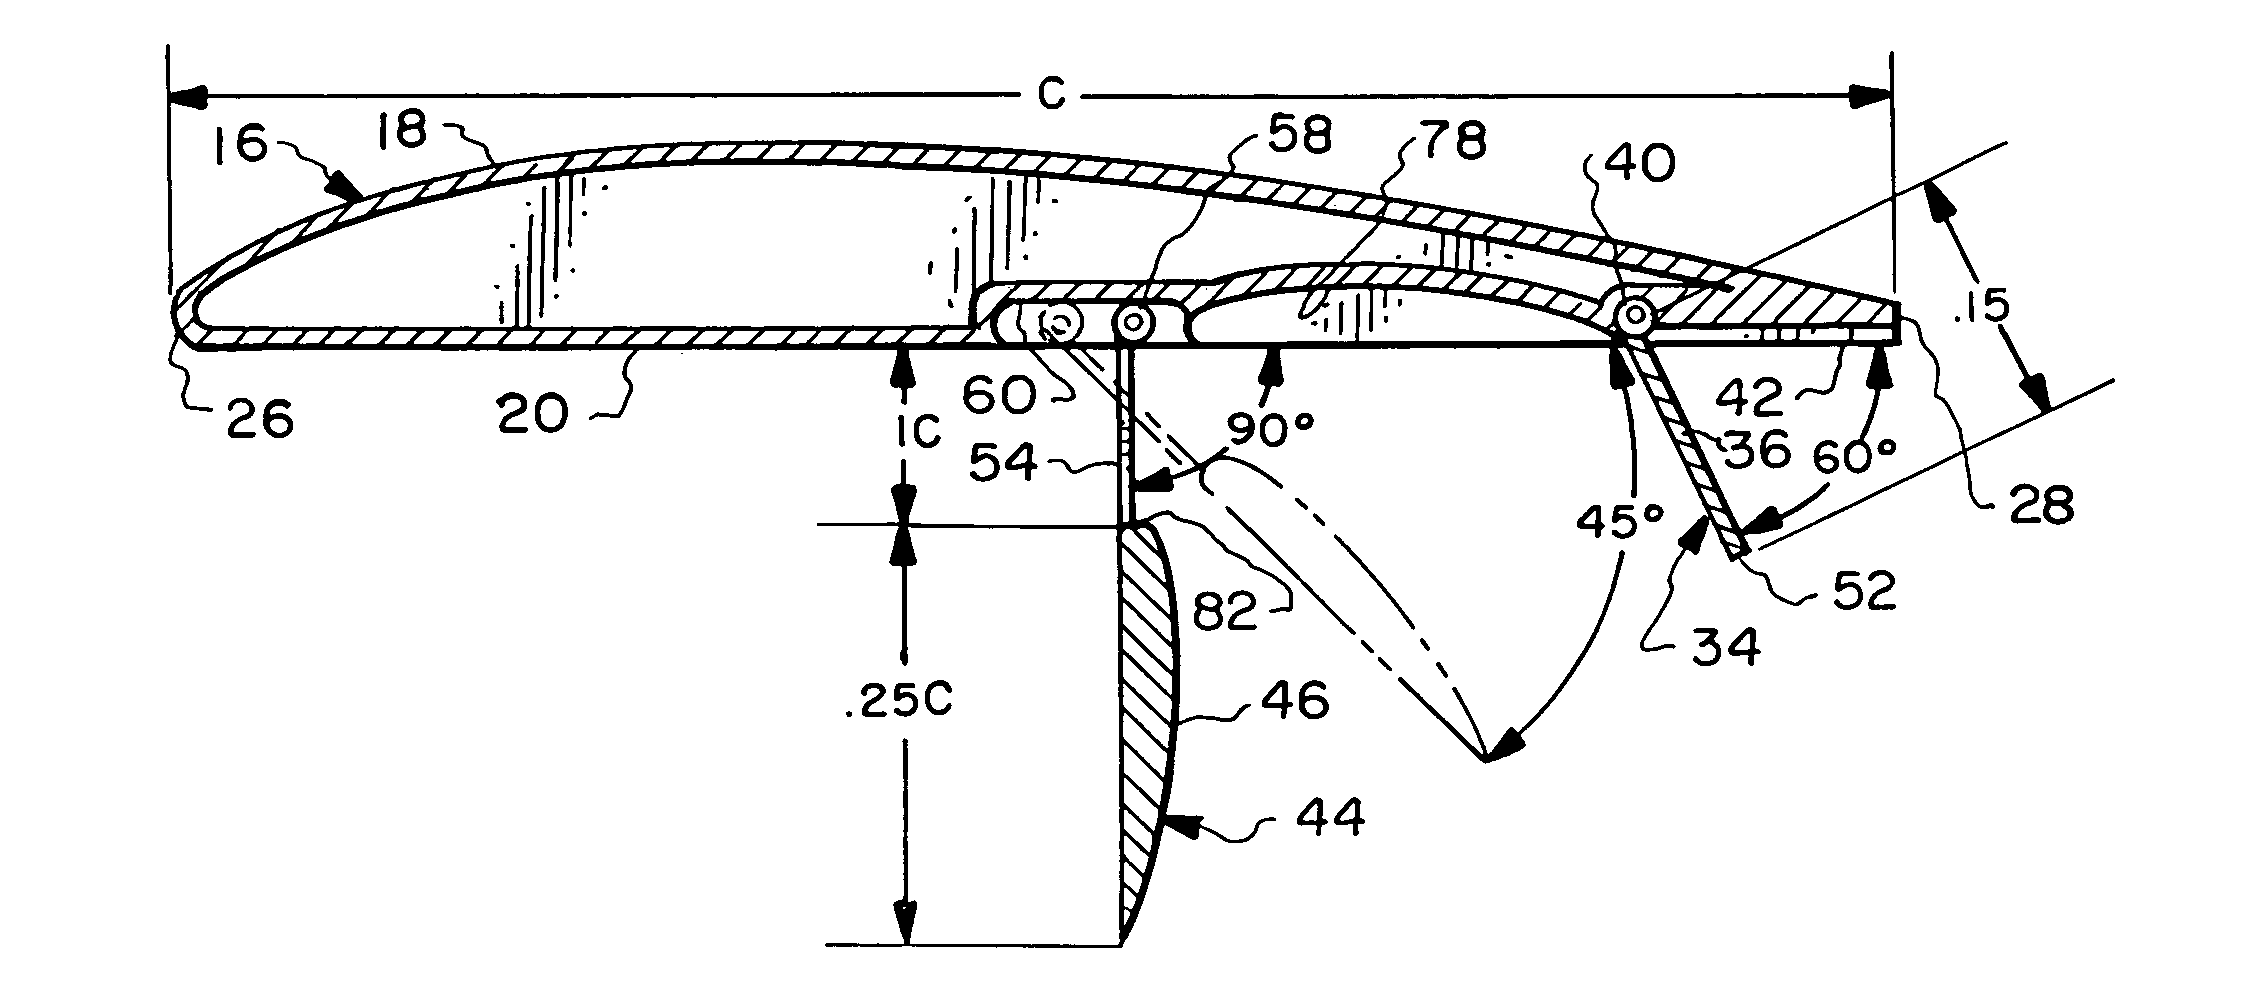 Auxiliary wing and flap assembly for an aircraft